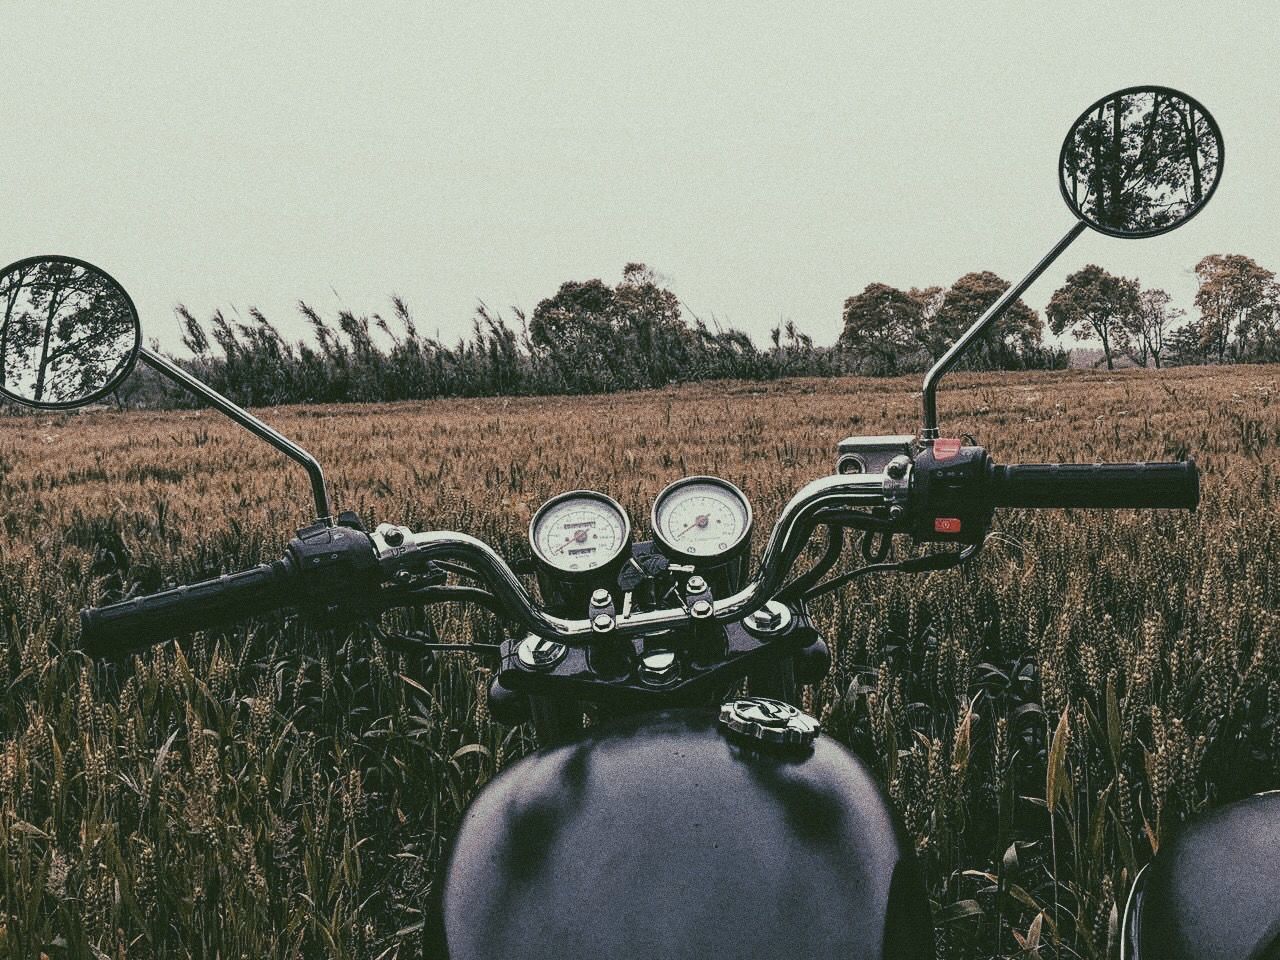 Motorcycle on agricultural field against clear sky